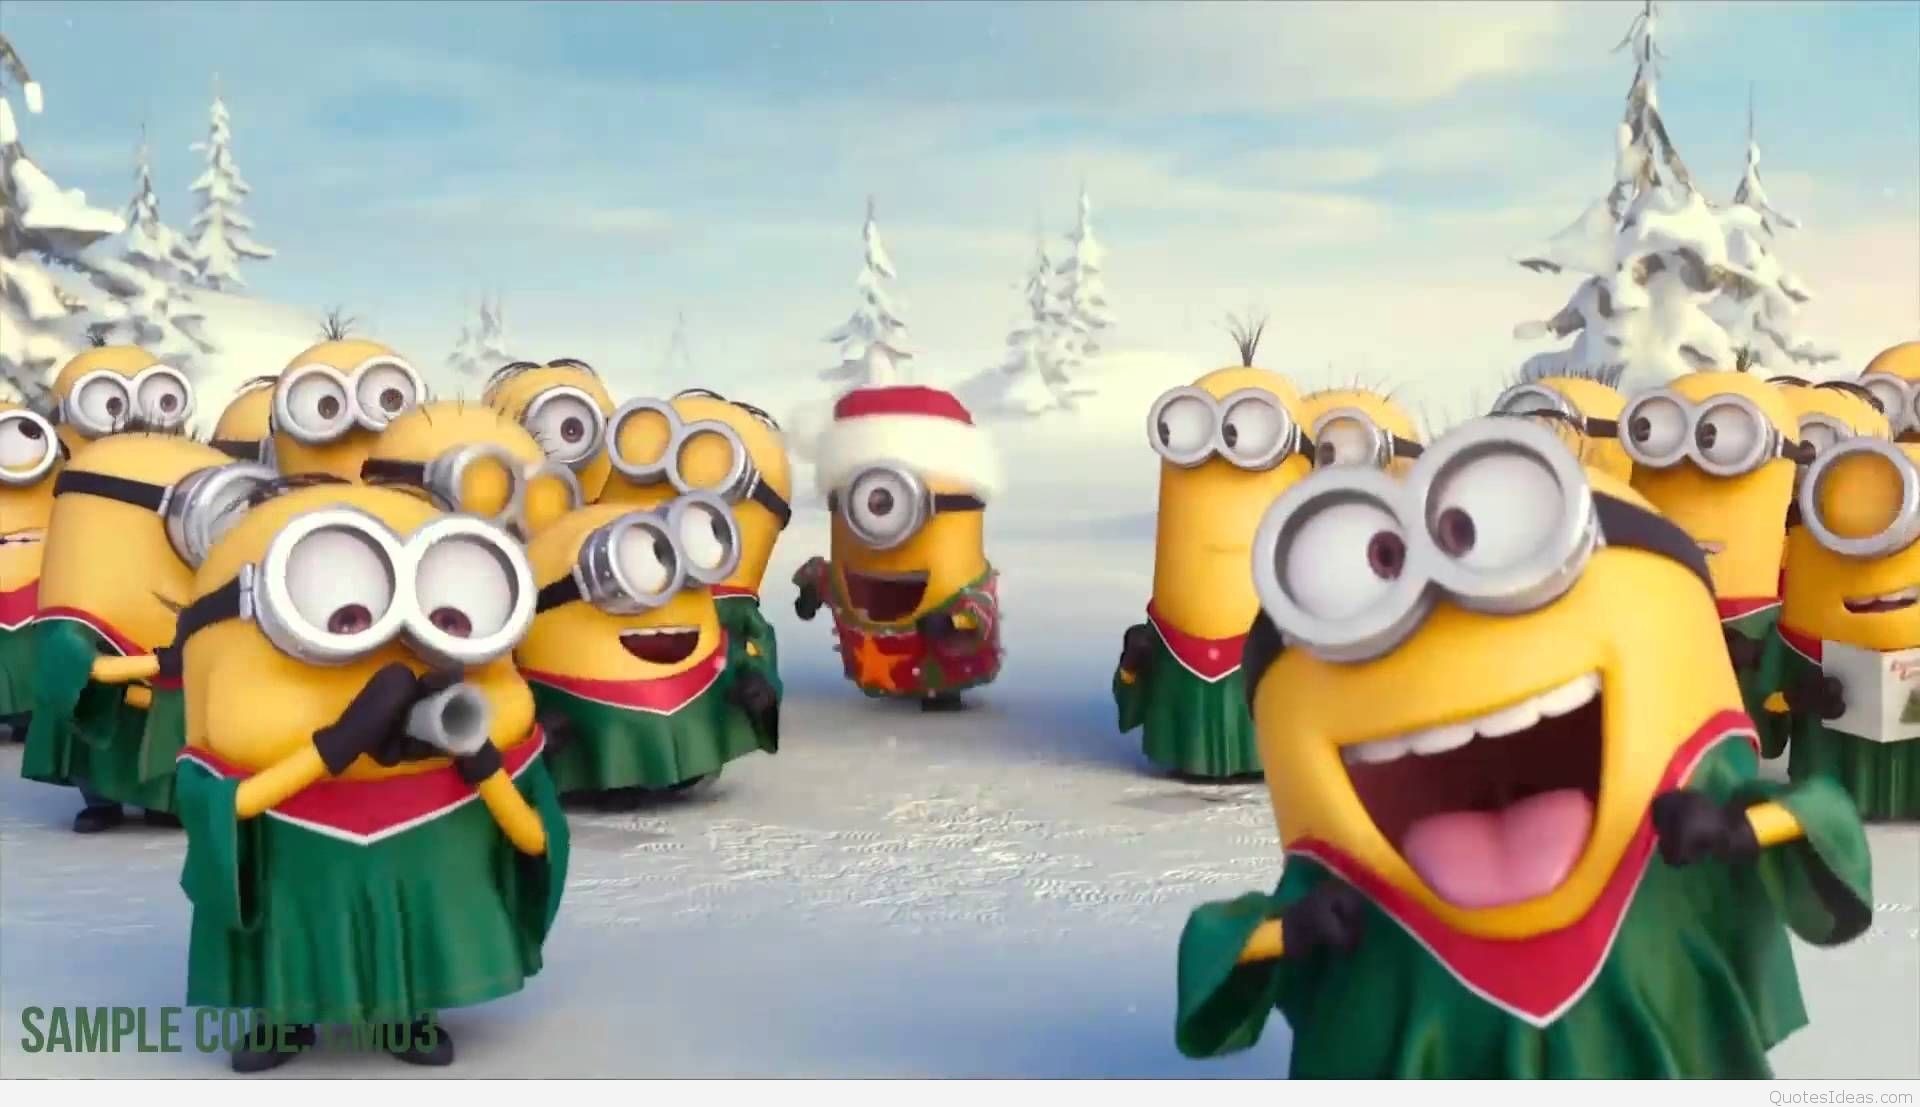 1920x1107 Funny Christmas Minions Wallpapers &amp; Images Hd 2015 2016 intended  for Minion Christmas